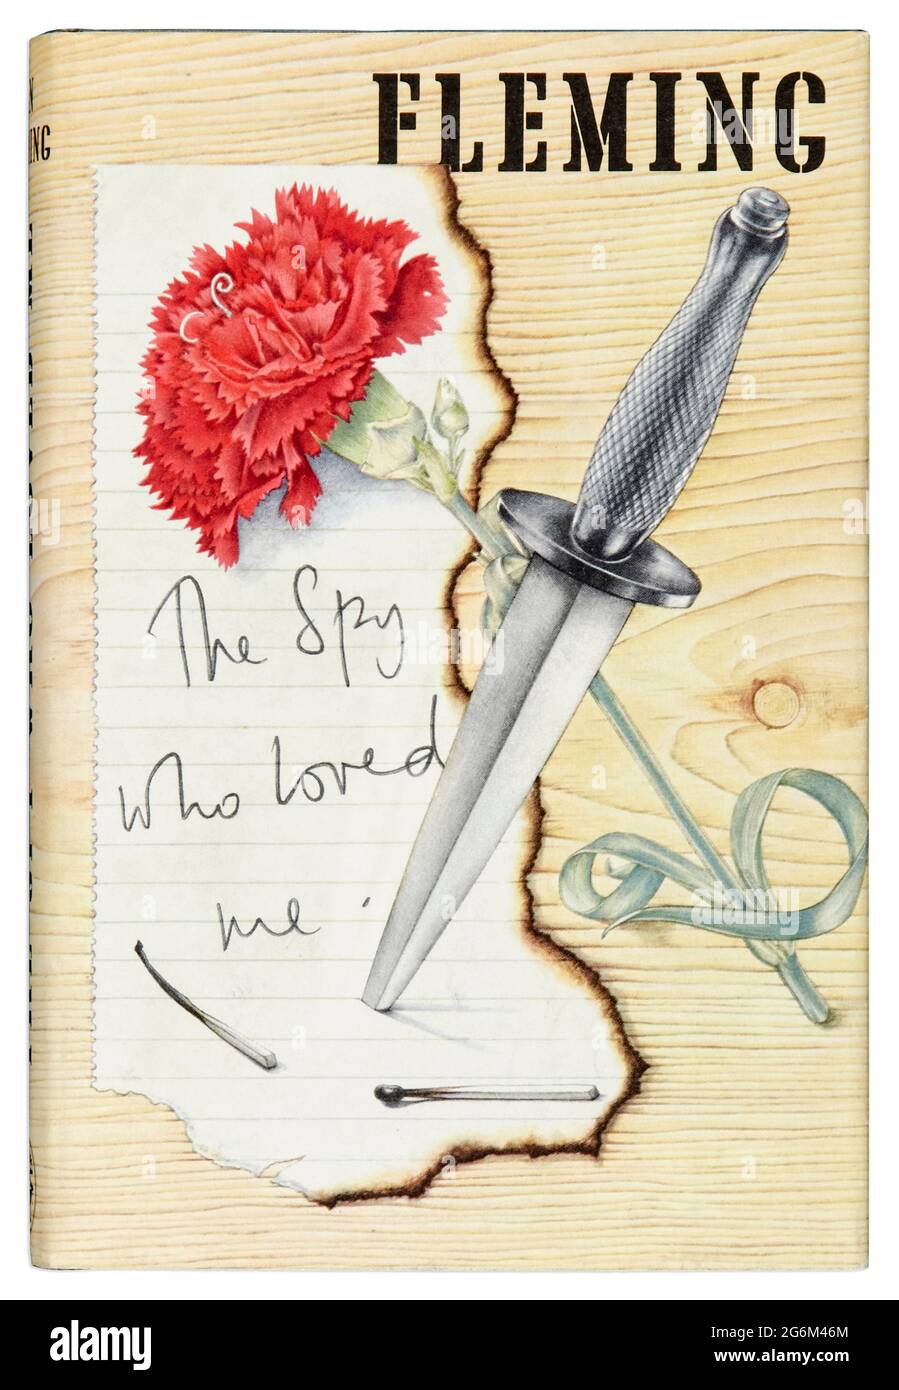 The Spy Who Loved Me by Ian Fleming (1908-1964) the ninth novel featuring British Secret Service agent 007 James Bond. A cautionary tale written from the perspective of a woman who finds herself in trouble and rescued by a chance encounter with Bond. Stock Photo